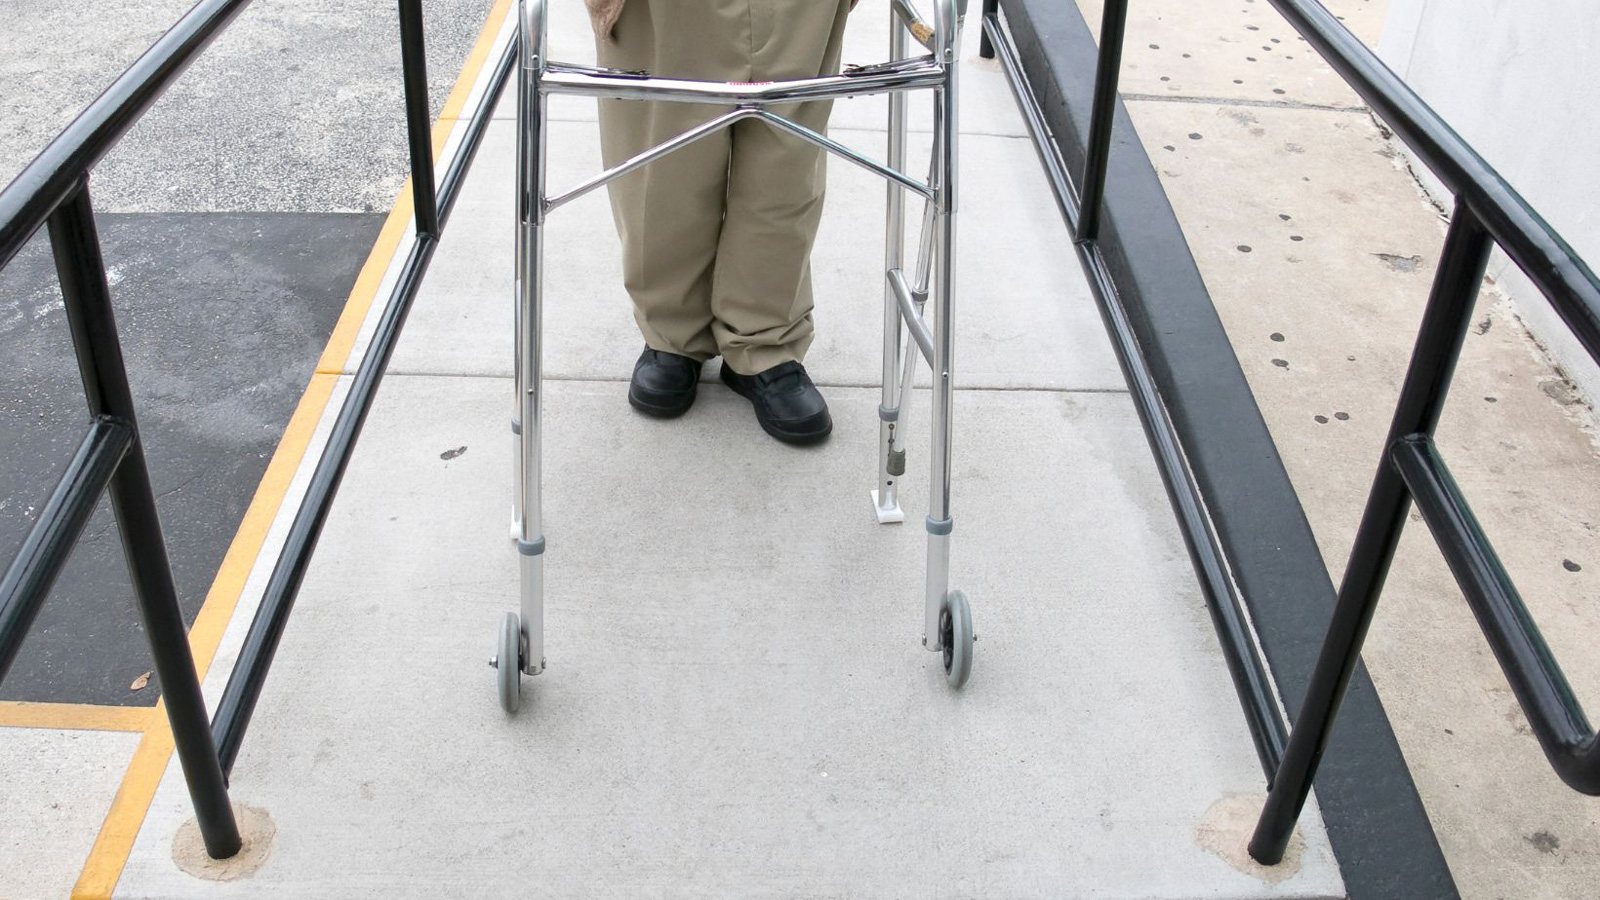 County seeks public input on how accessible its buildings are